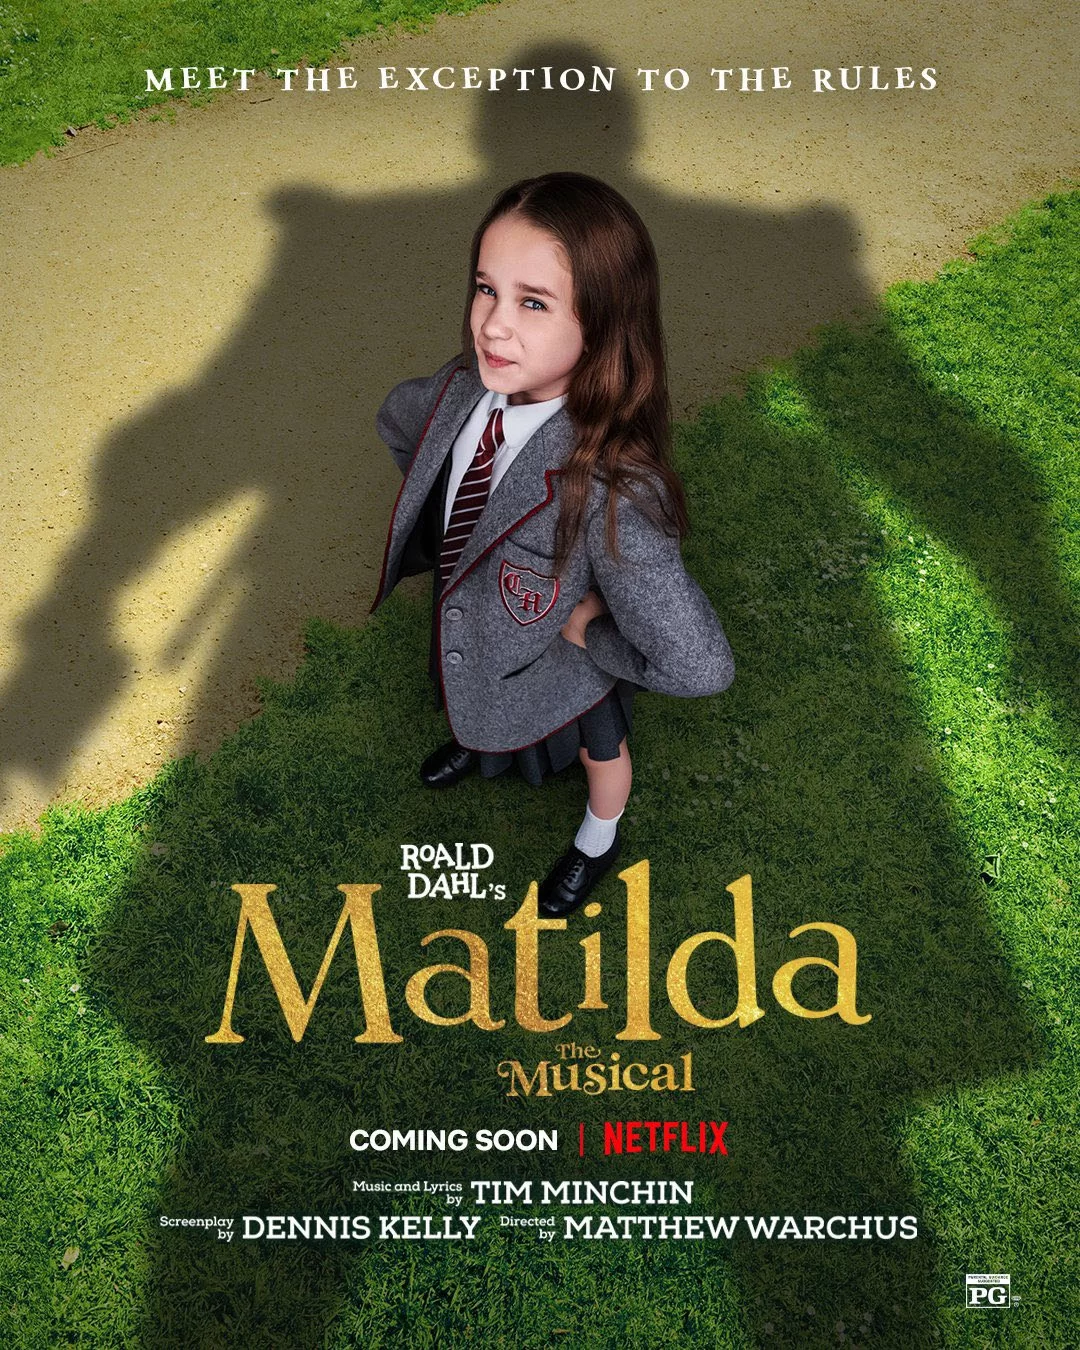 Matilda the Musical everything we know so far poster